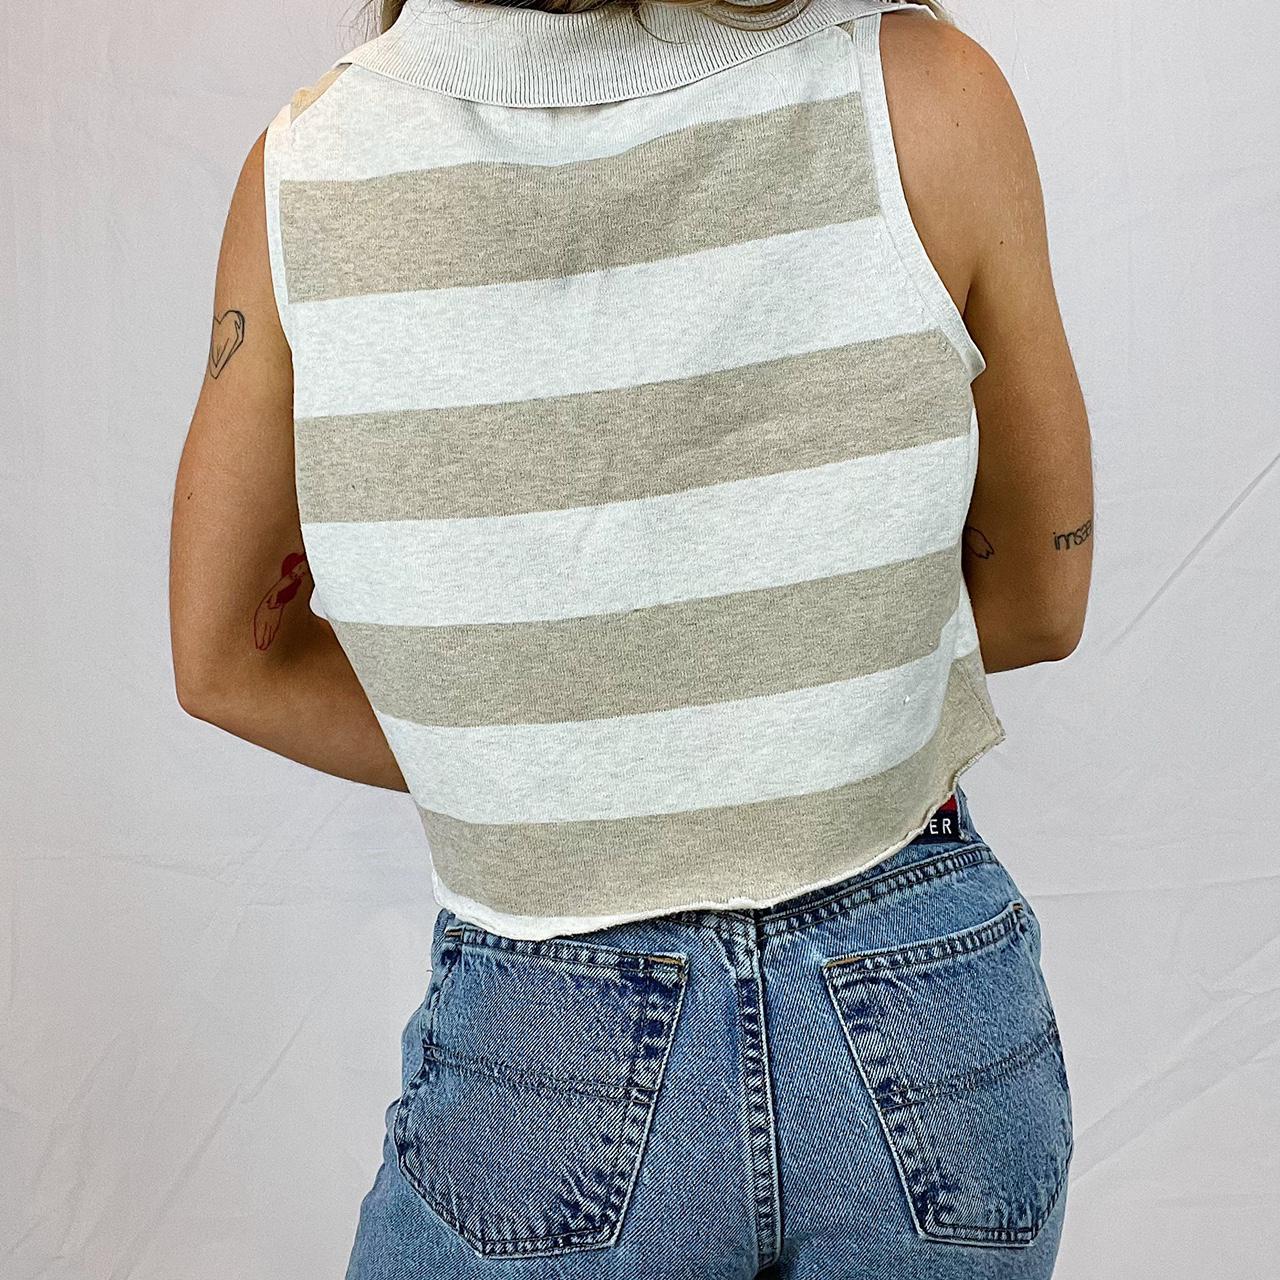 Product Image 3 - vintage collared crop 🍈

beige and